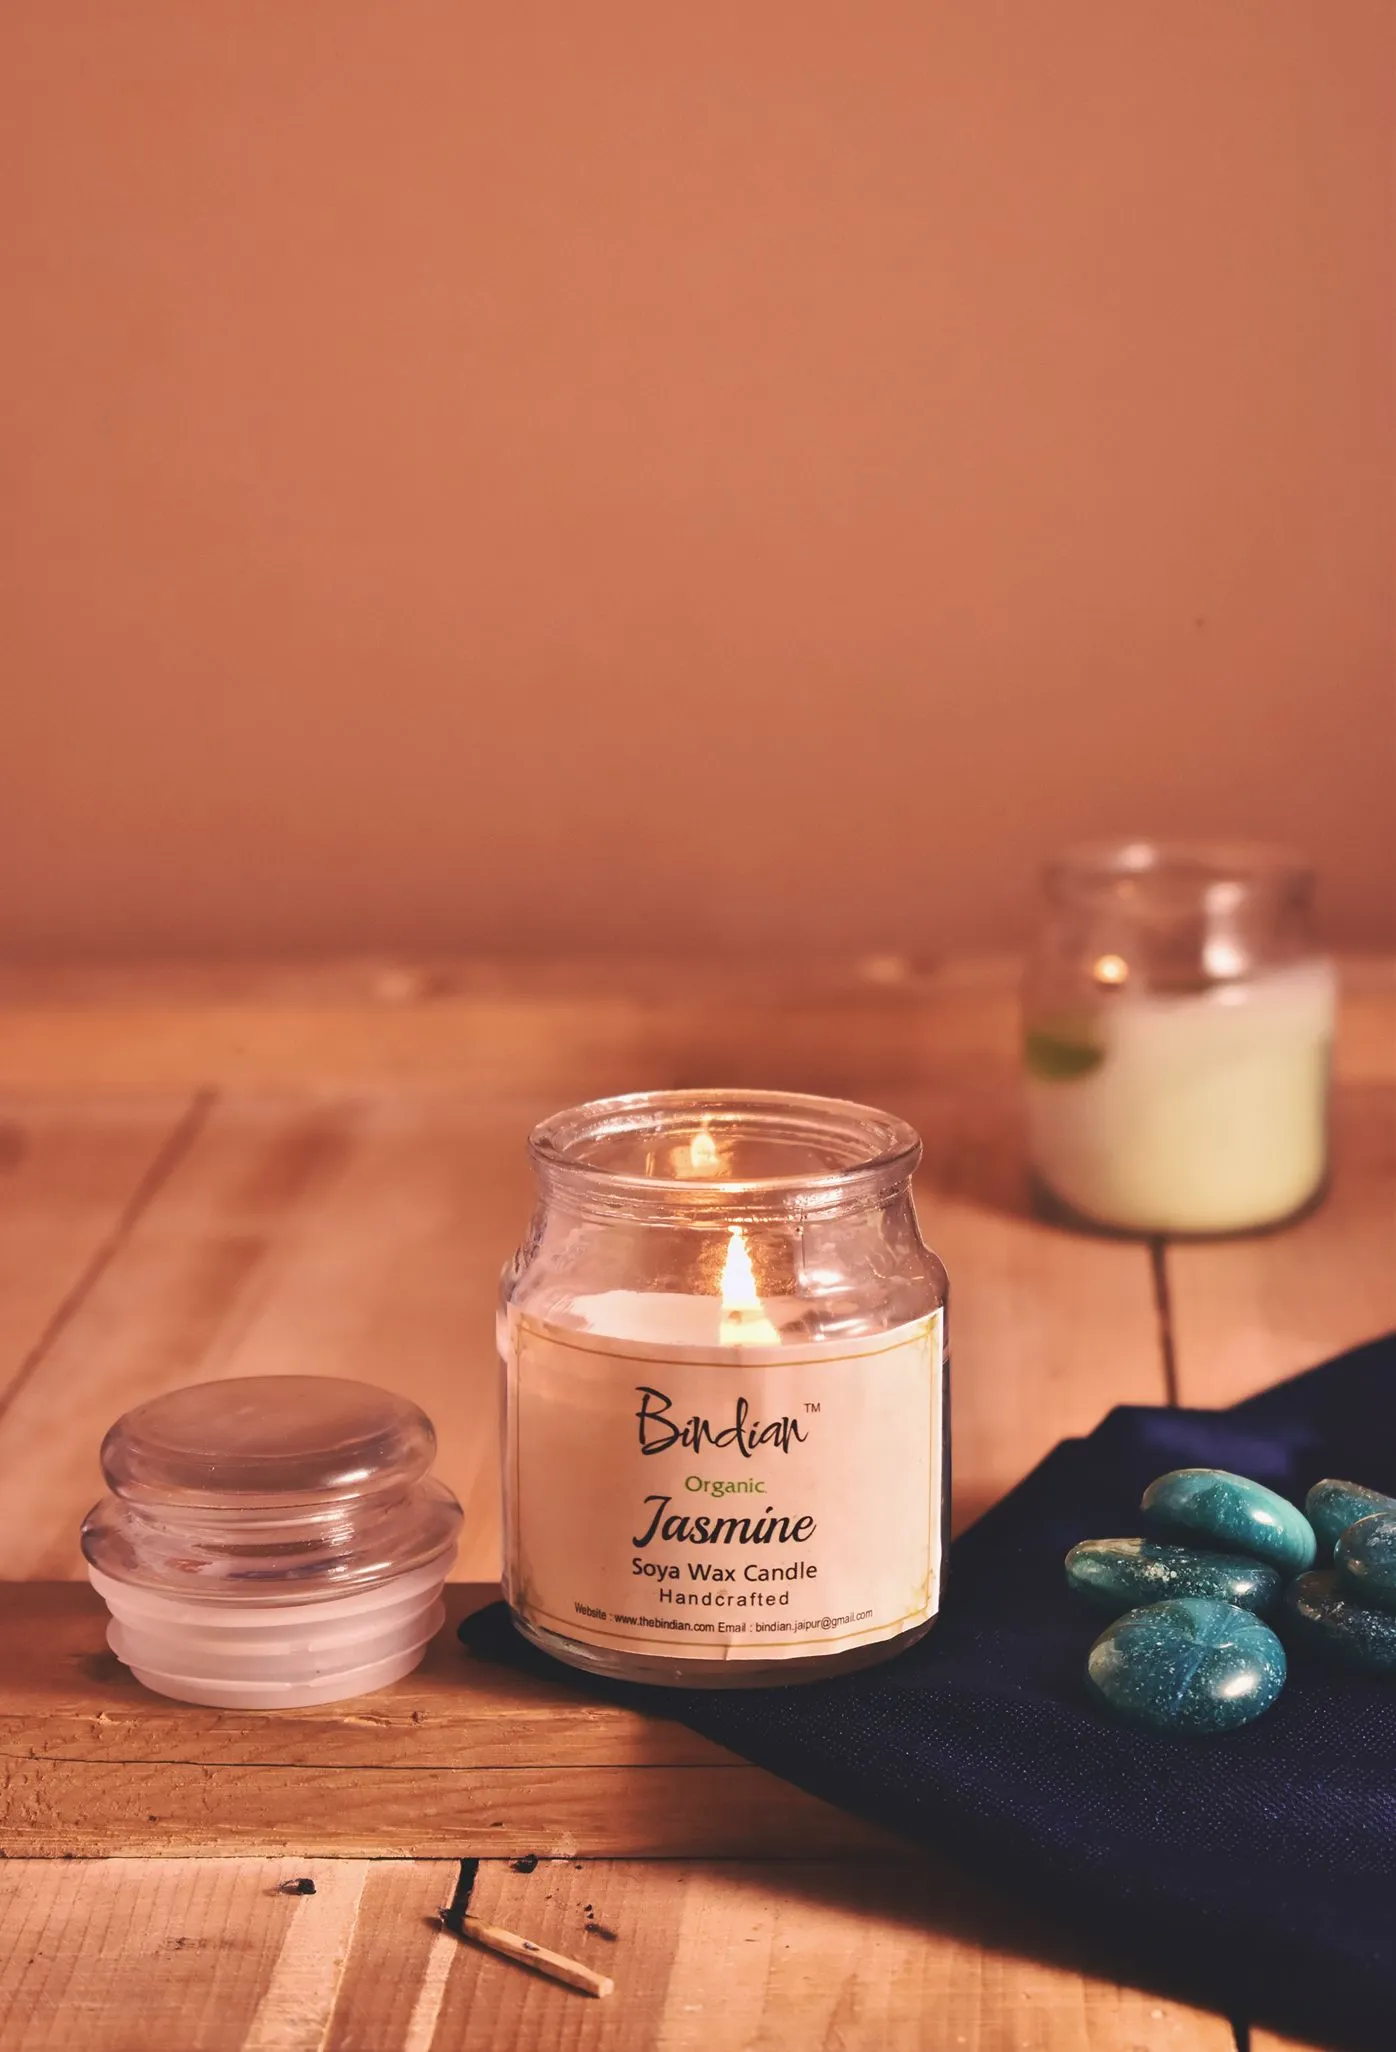 Jasmine Flavour Scented Candle, 14-18 Hours Long Burning Time